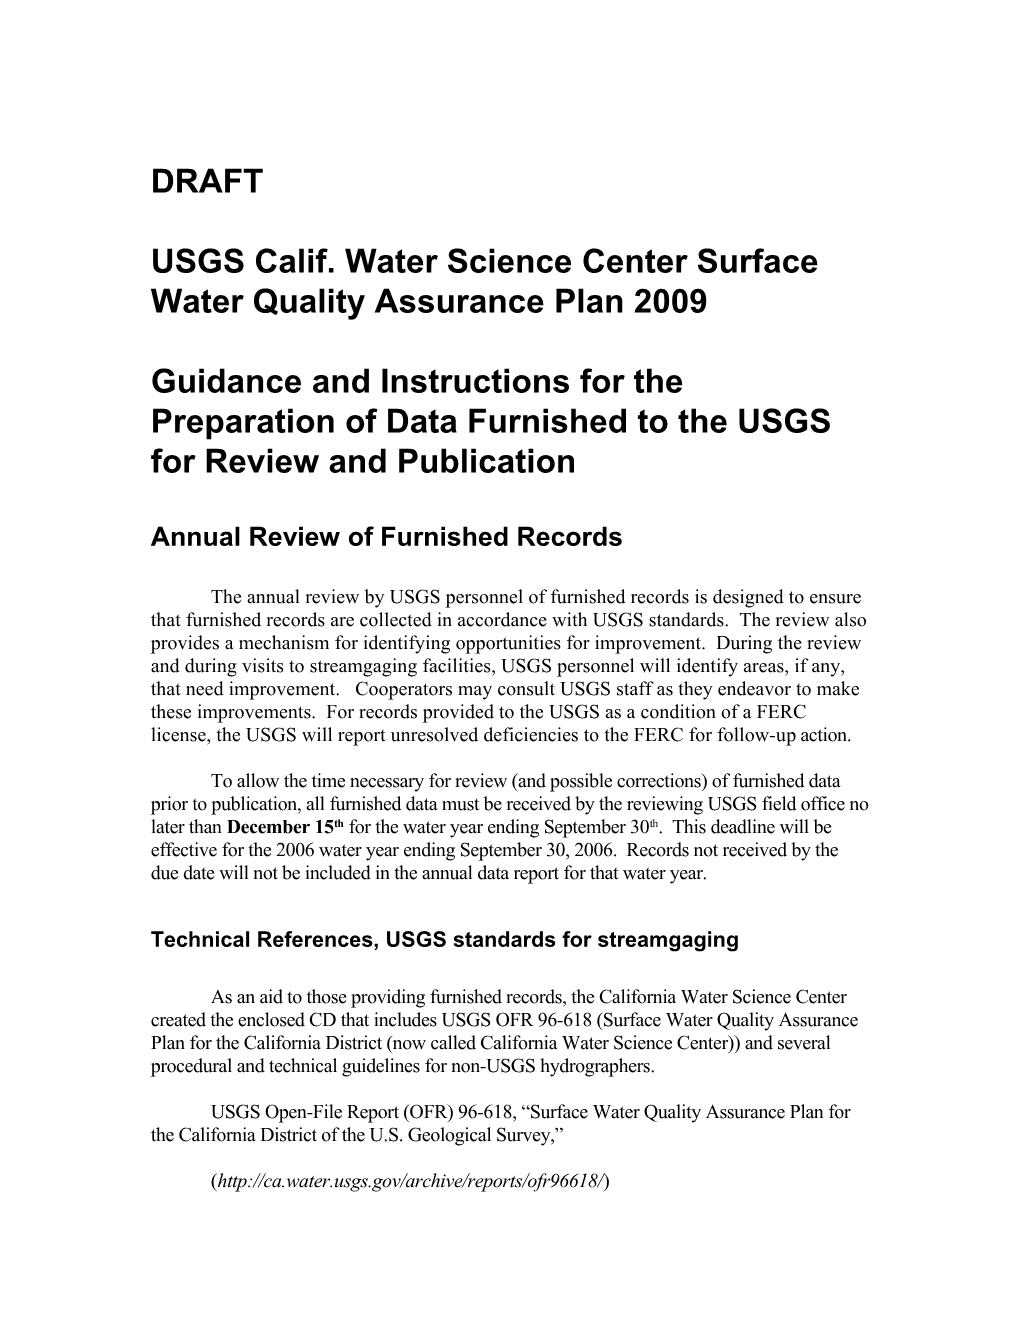 USGS Calif. Water Science Center Surface Water Quality Assurance Plan 2009